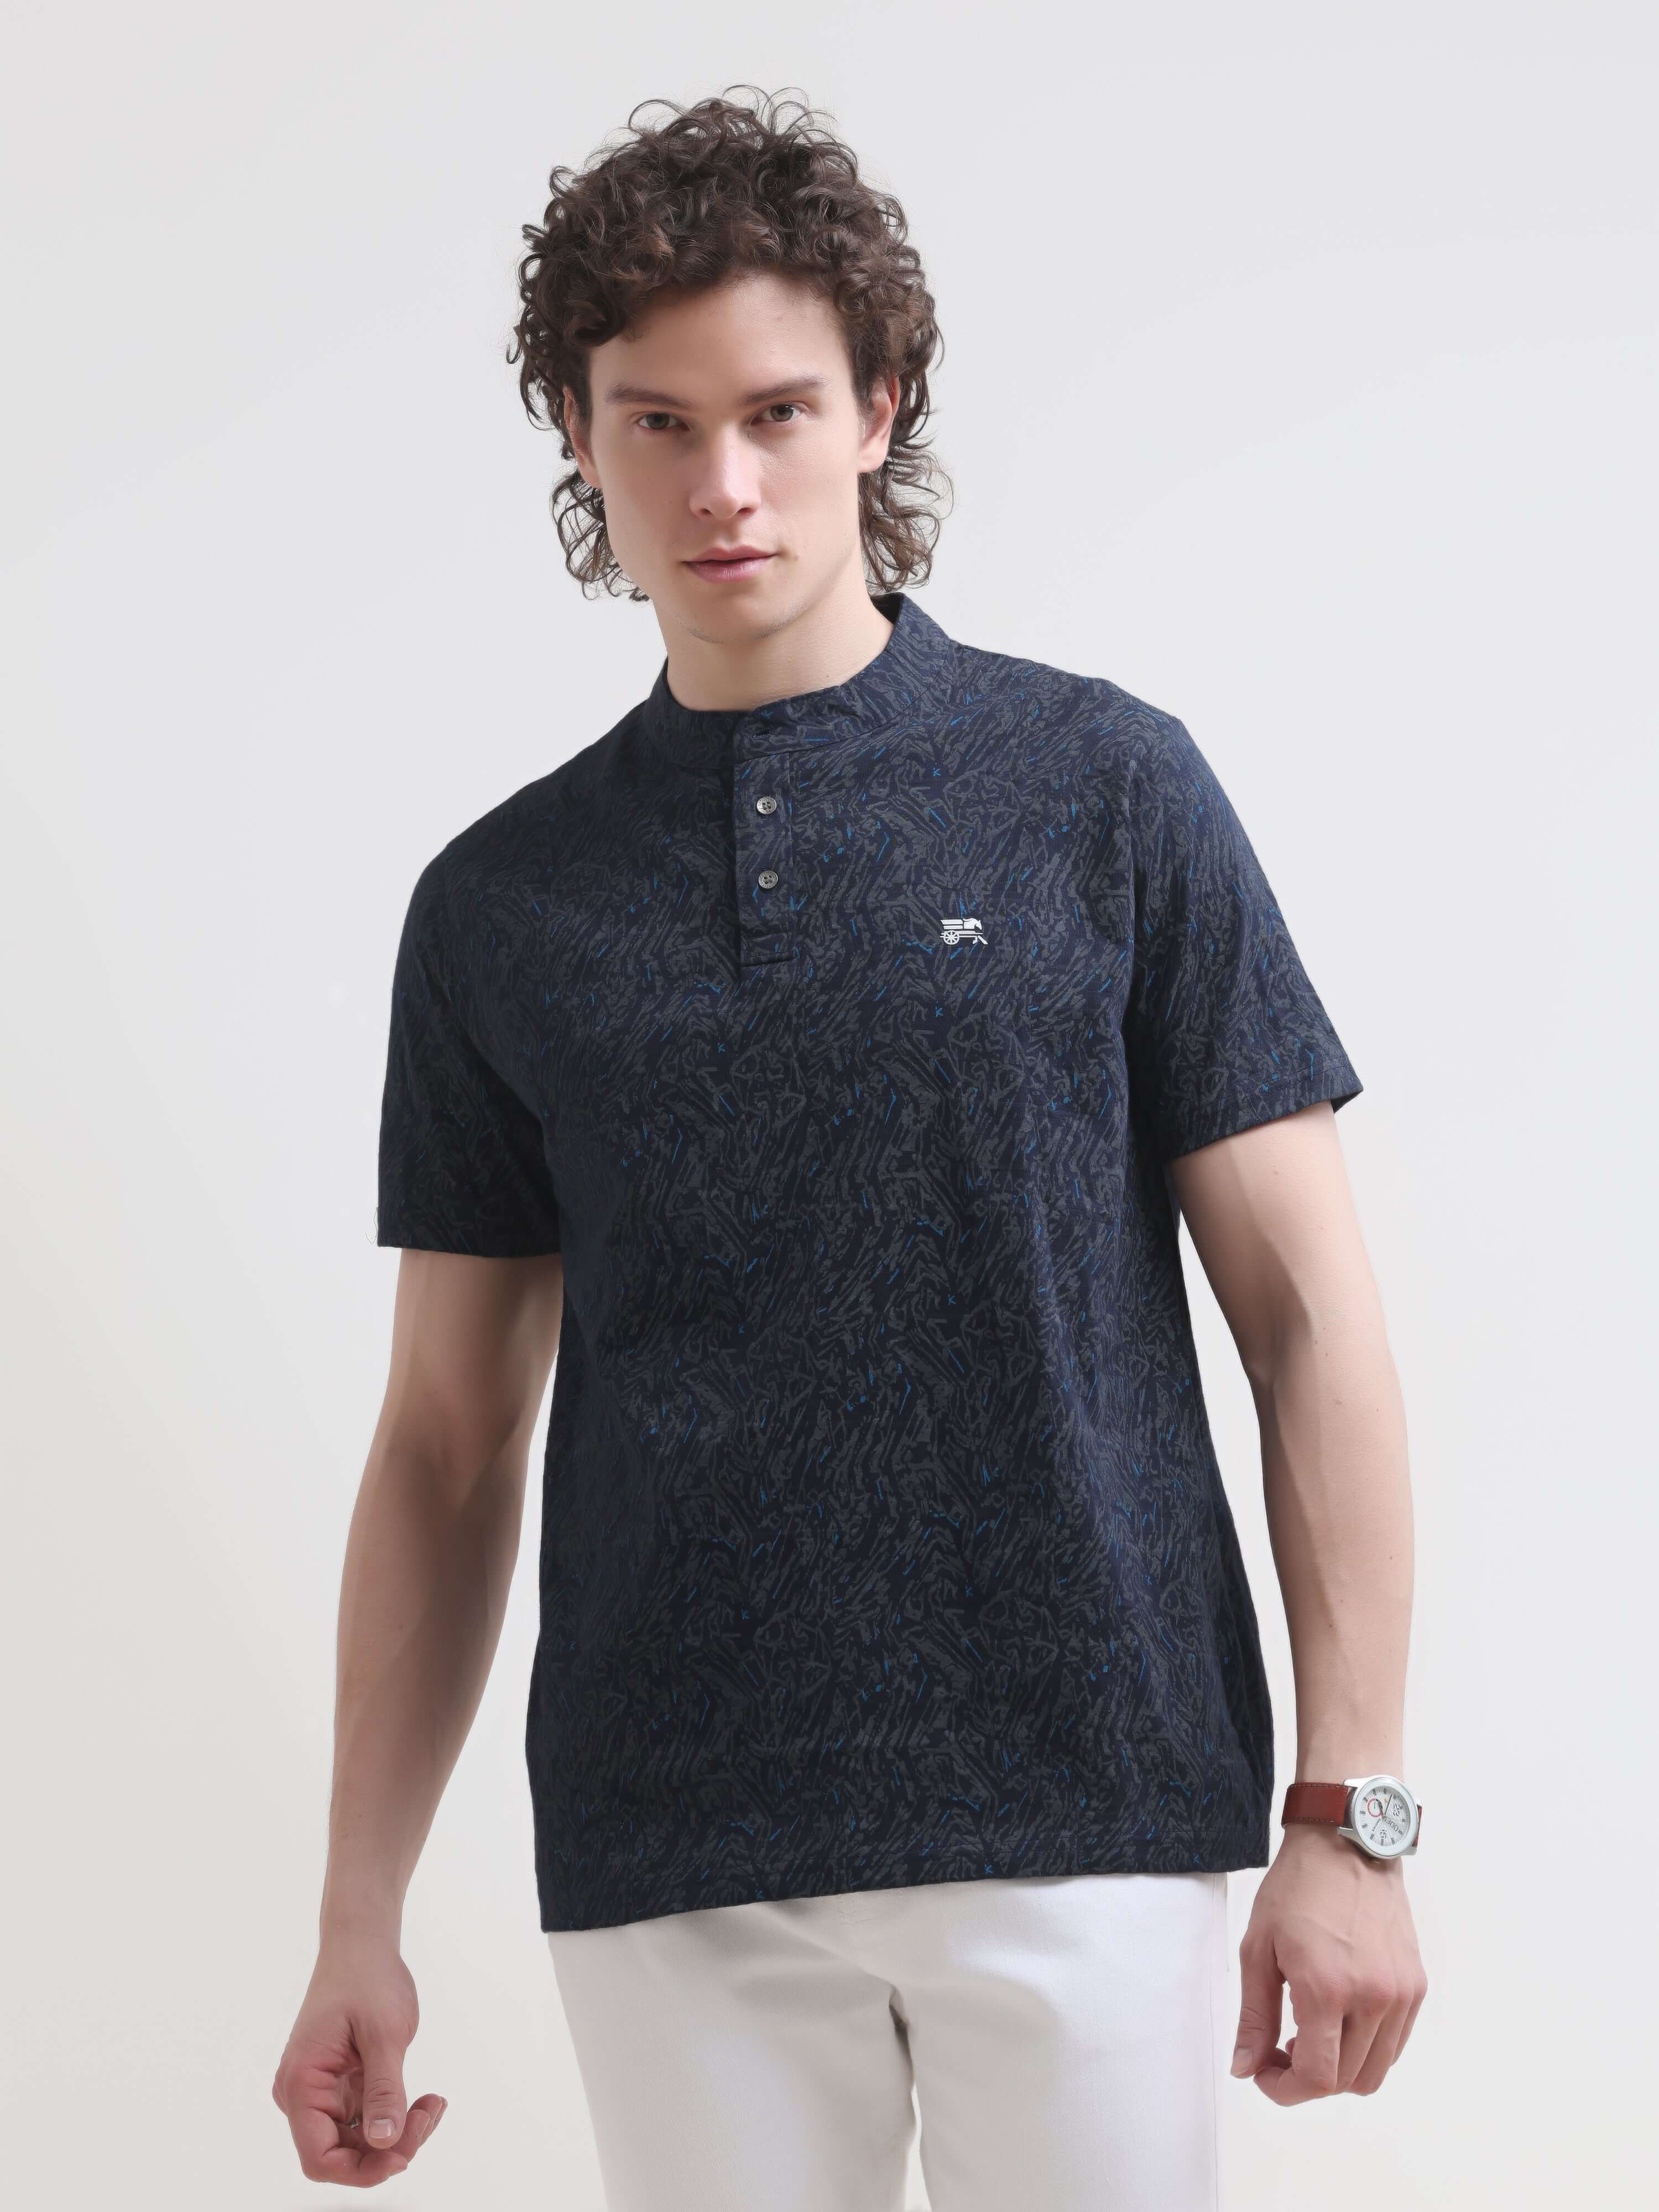 Men's Tropical Blue Henley T-Shirt - New Arrival shop online at Estilocus. Discover the latest in men's casual summer fashion with our Tropical Blue Henley T-Shirt. Soft, stretchy, 100% cotton. Perfect for all occasions.